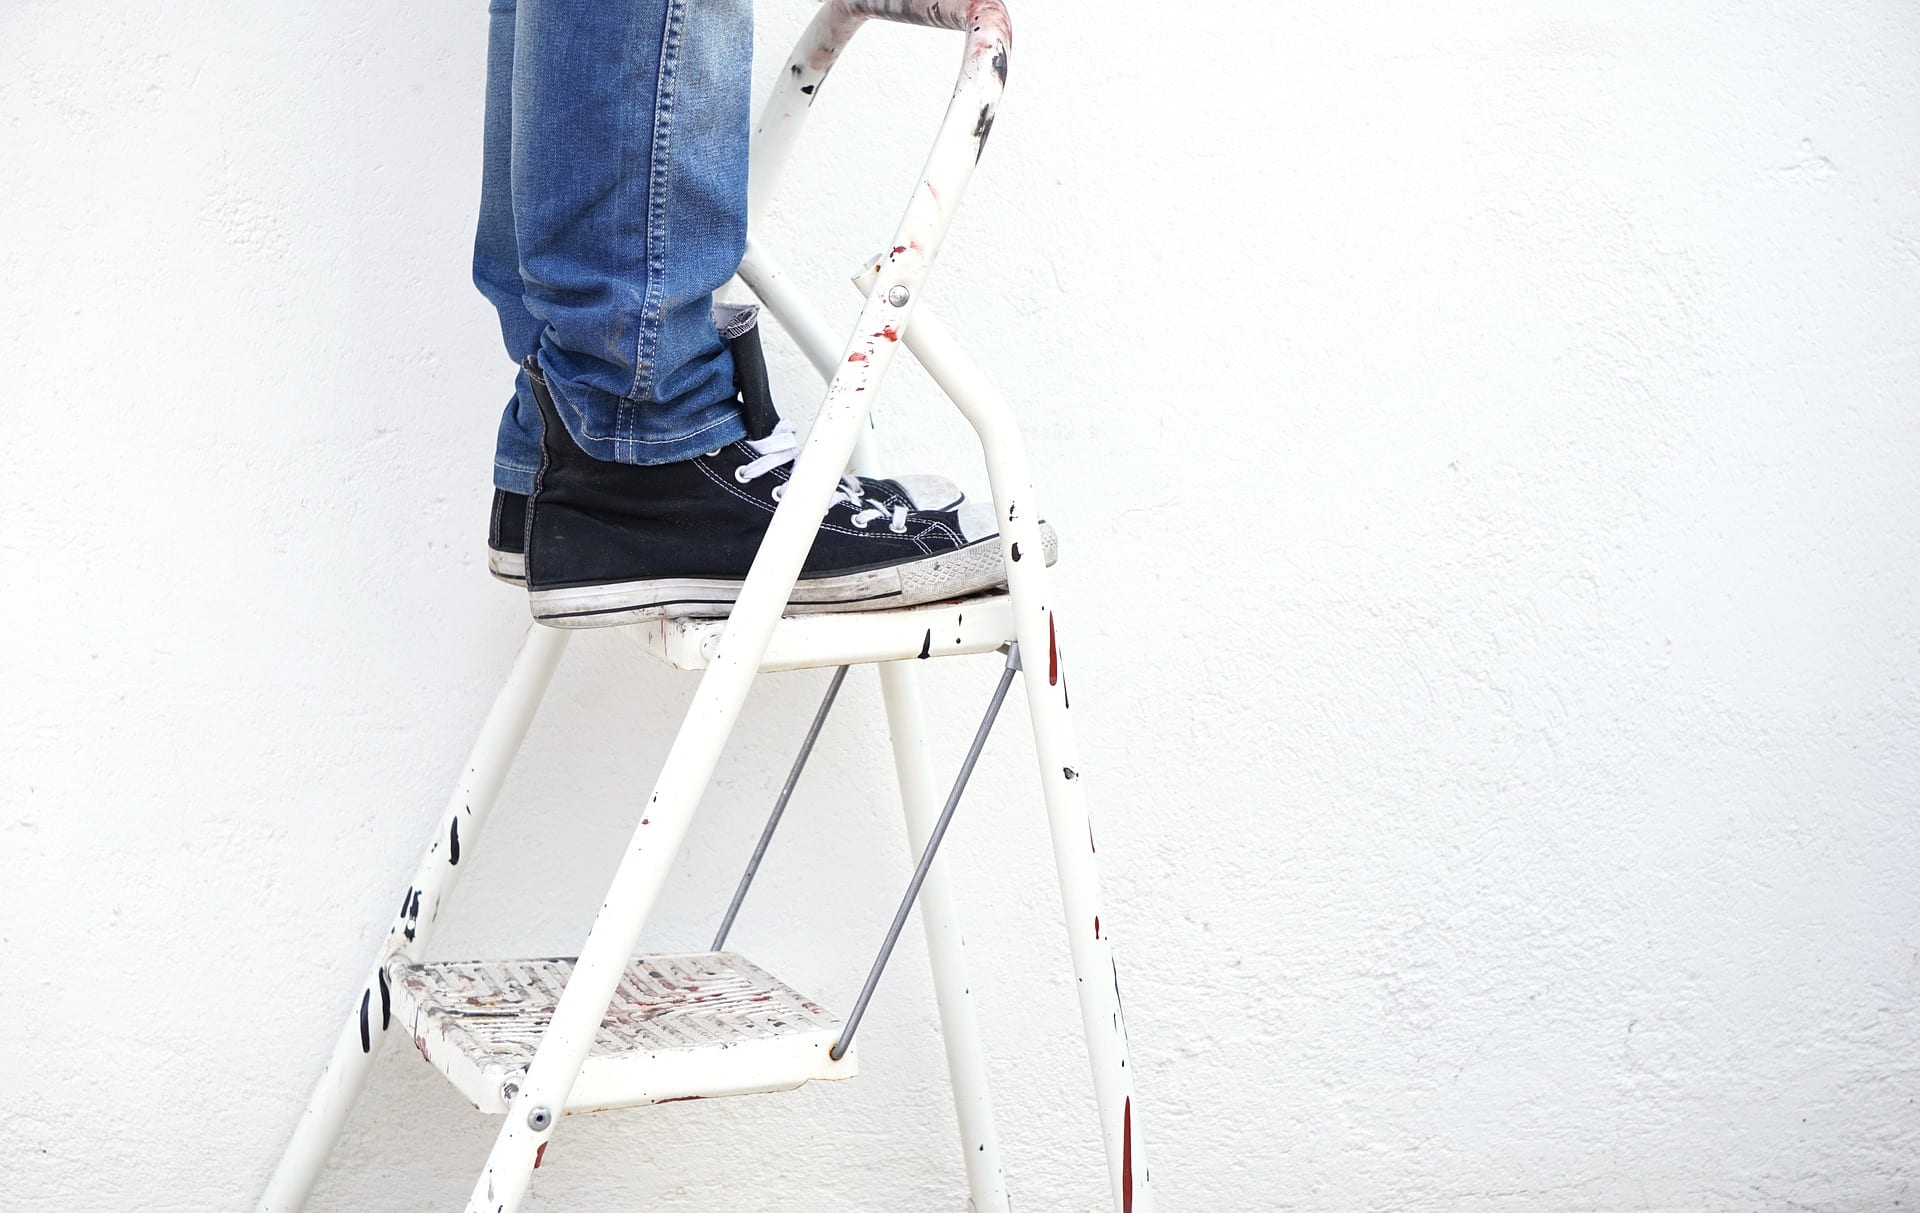 painter on a ladder